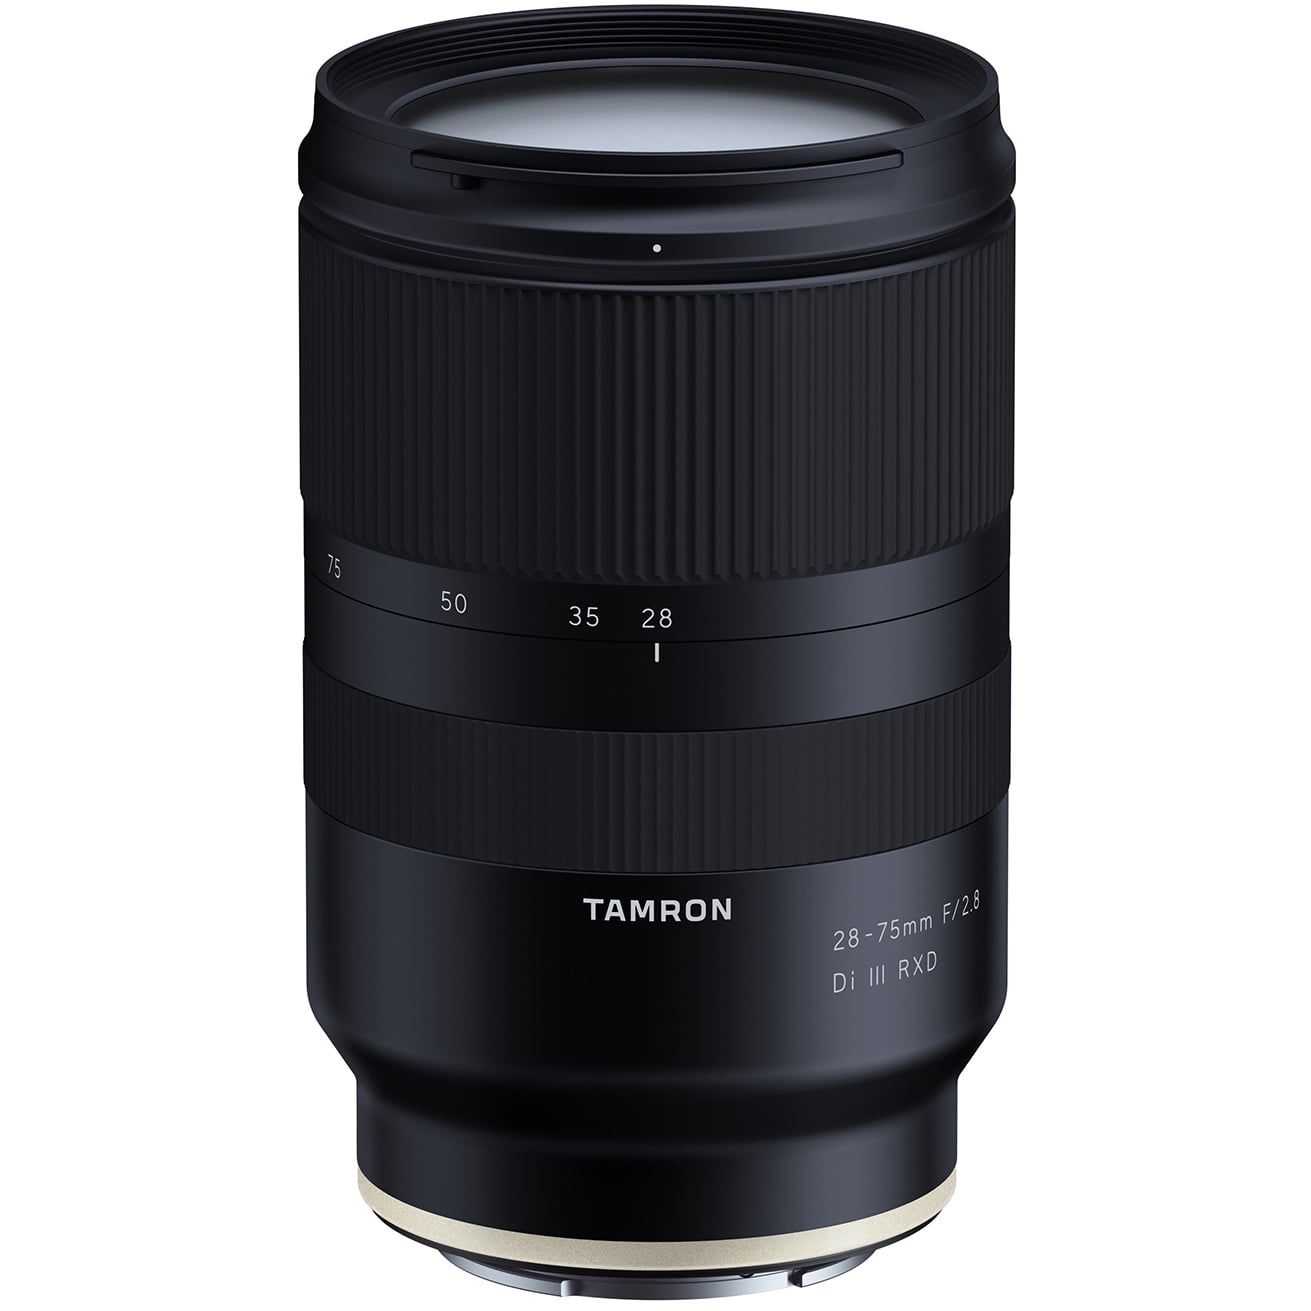 TAMRON 28-75mm f/2.8 Di III RXD F/SONY, E-MOUNT/FULL-FRAME FORMAT, CONSTANT  f/2.8 MAX APERURE, RXD STEPPING AF MOTOR, FLUORINE-COATED FRONT ELEMENT, 